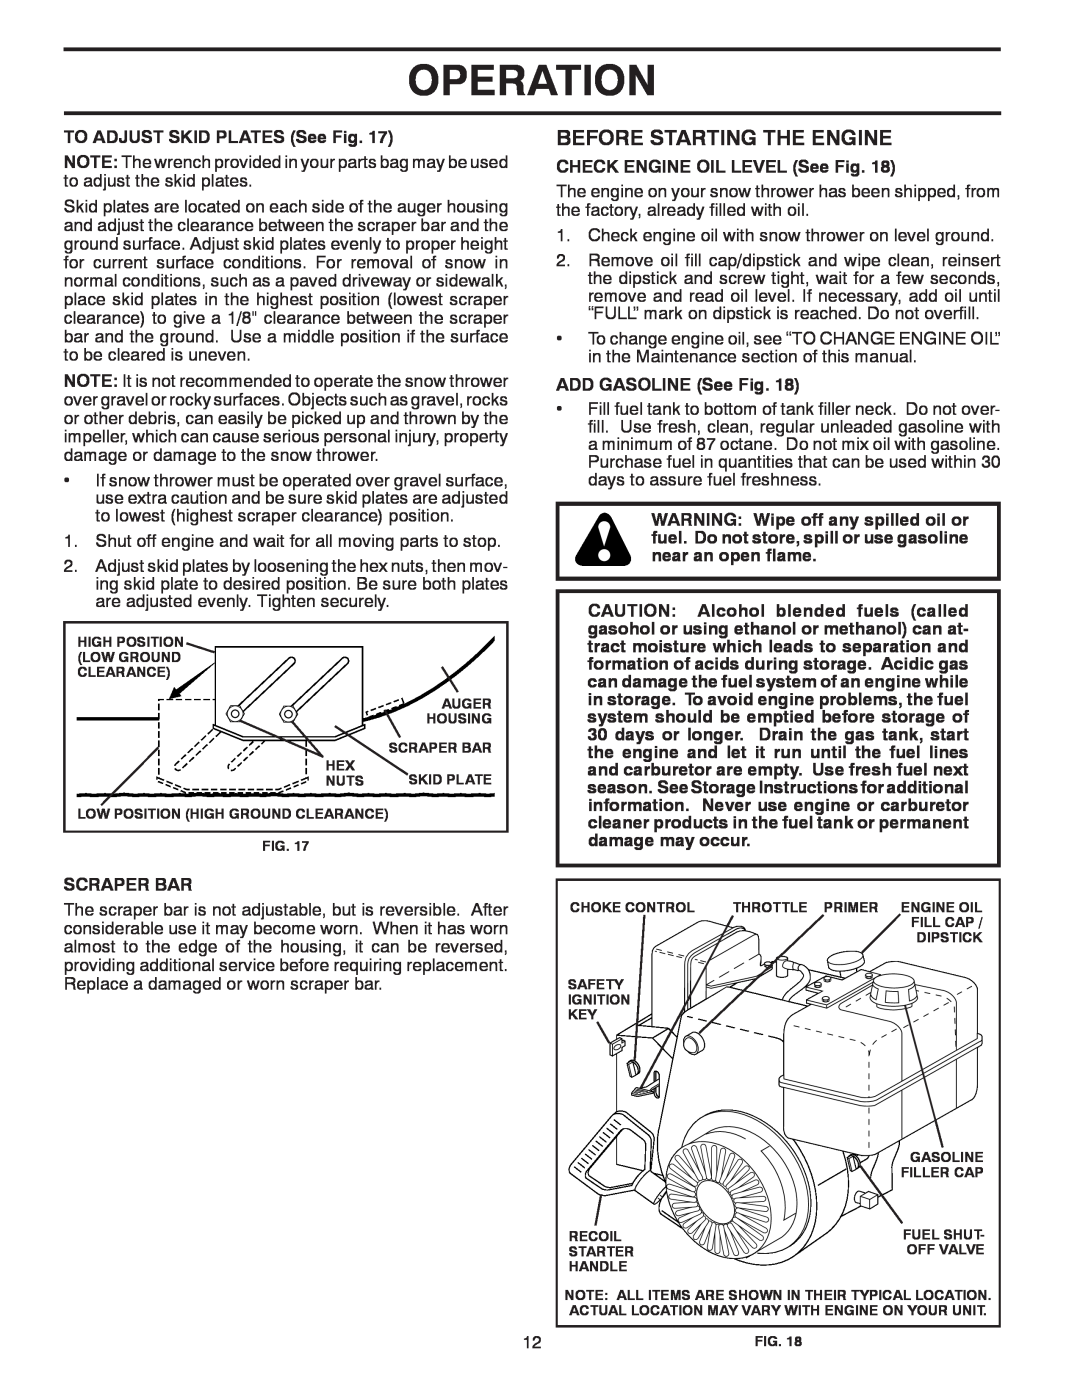 Poulan 415242 Operation, Before Starting The Engine, TO ADJUST SKID PLATES See Fig, CHECK ENGINE OIL LEVEL See Fig 